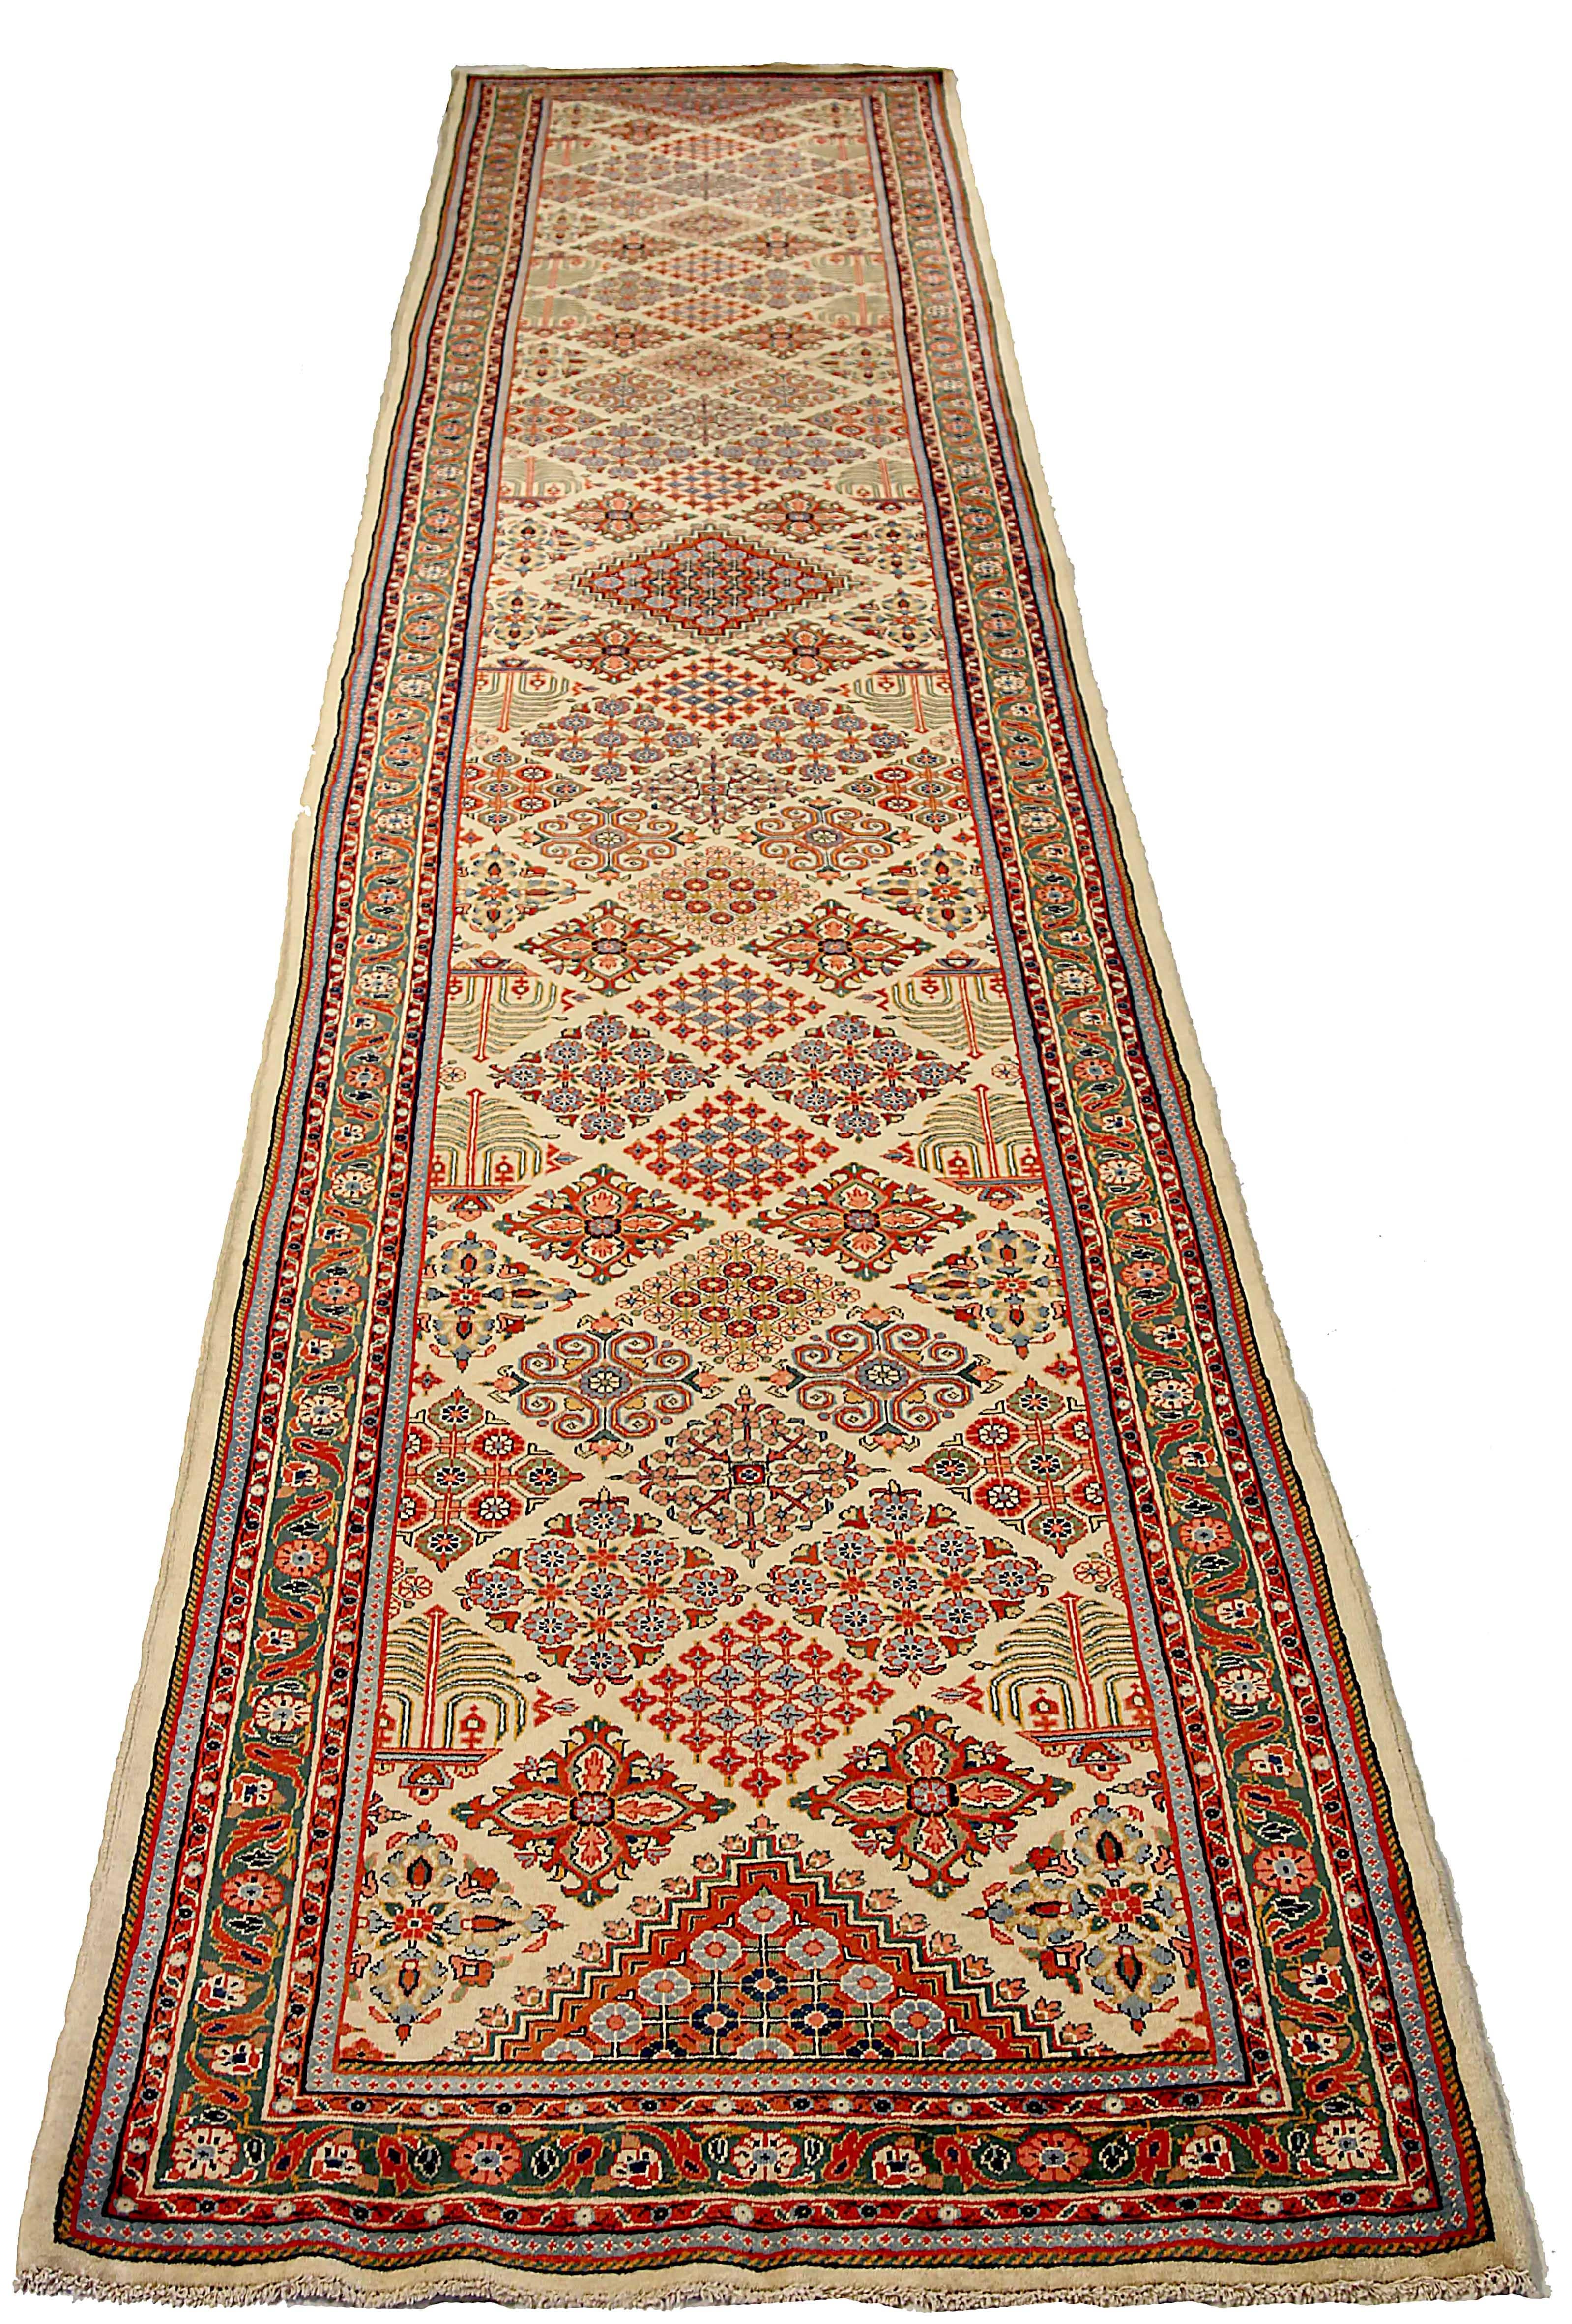 Antique Persian runner rug handwoven from the finest sheep’s wool. It’s colored with all-natural vegetable dyes that are safe for humans and pets. It’s a traditional Sarouk design handwoven by expert artisans. It’s a lovely runner rug that can be